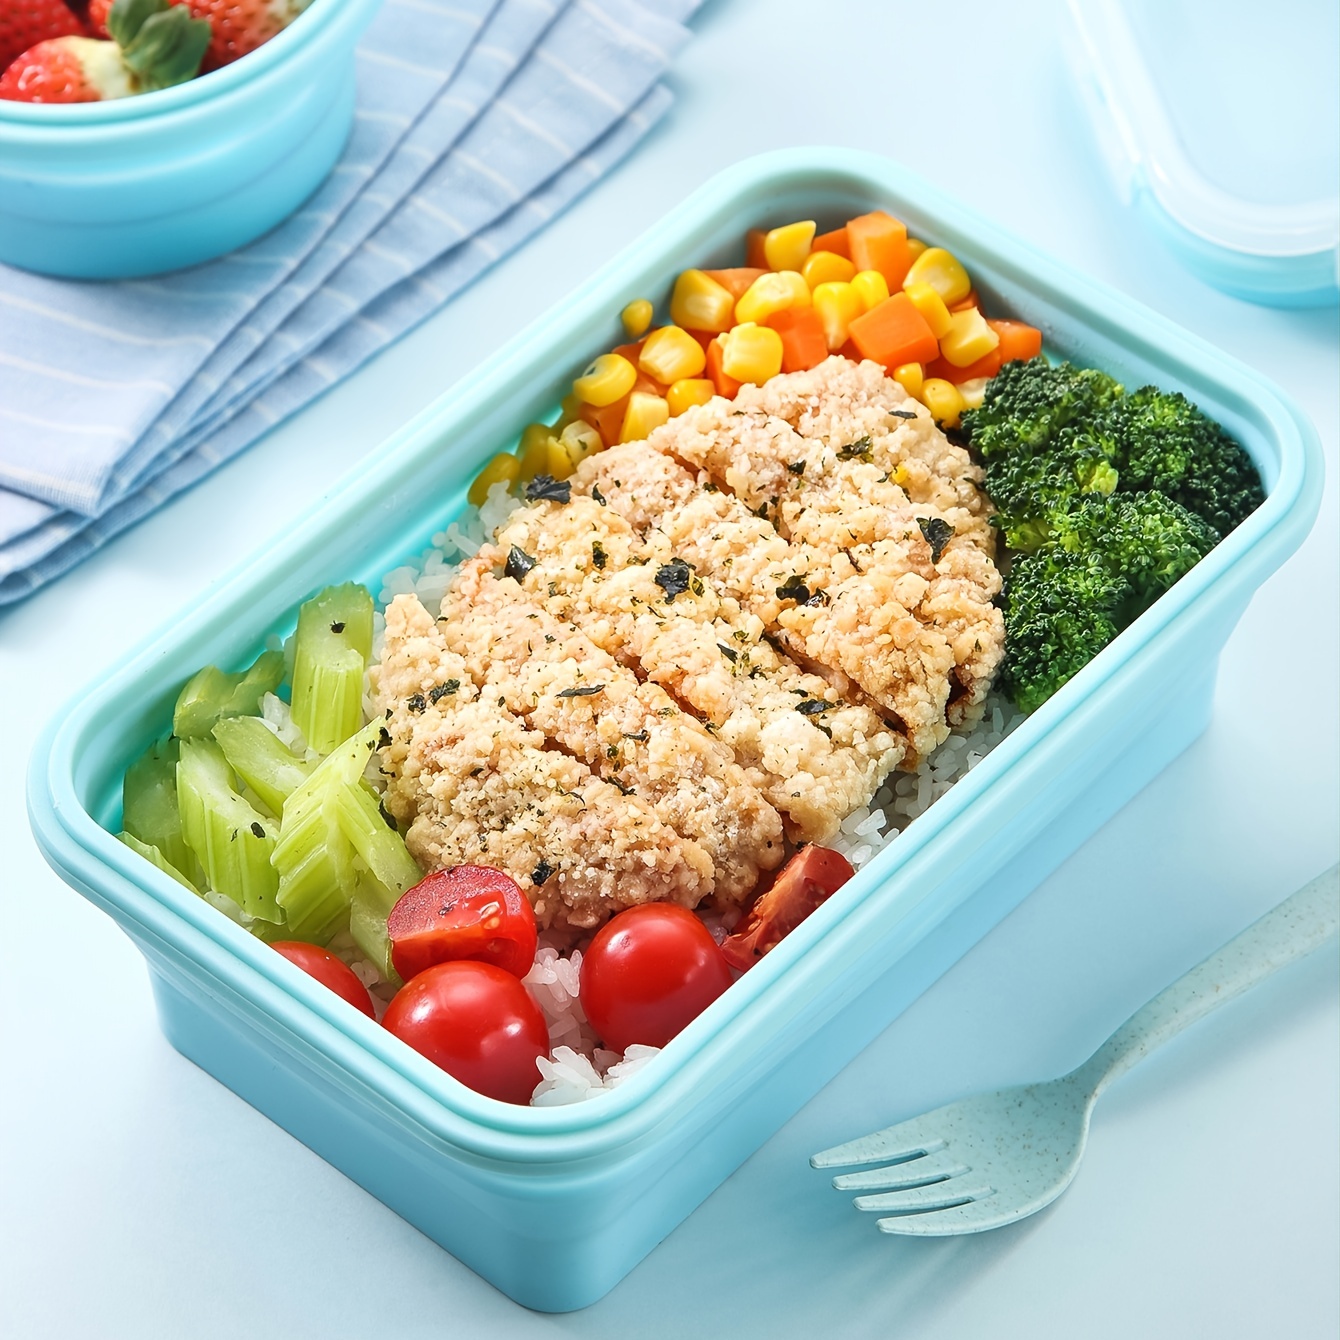 Microwave Freezer Lunch Boxes, Food Storage Container